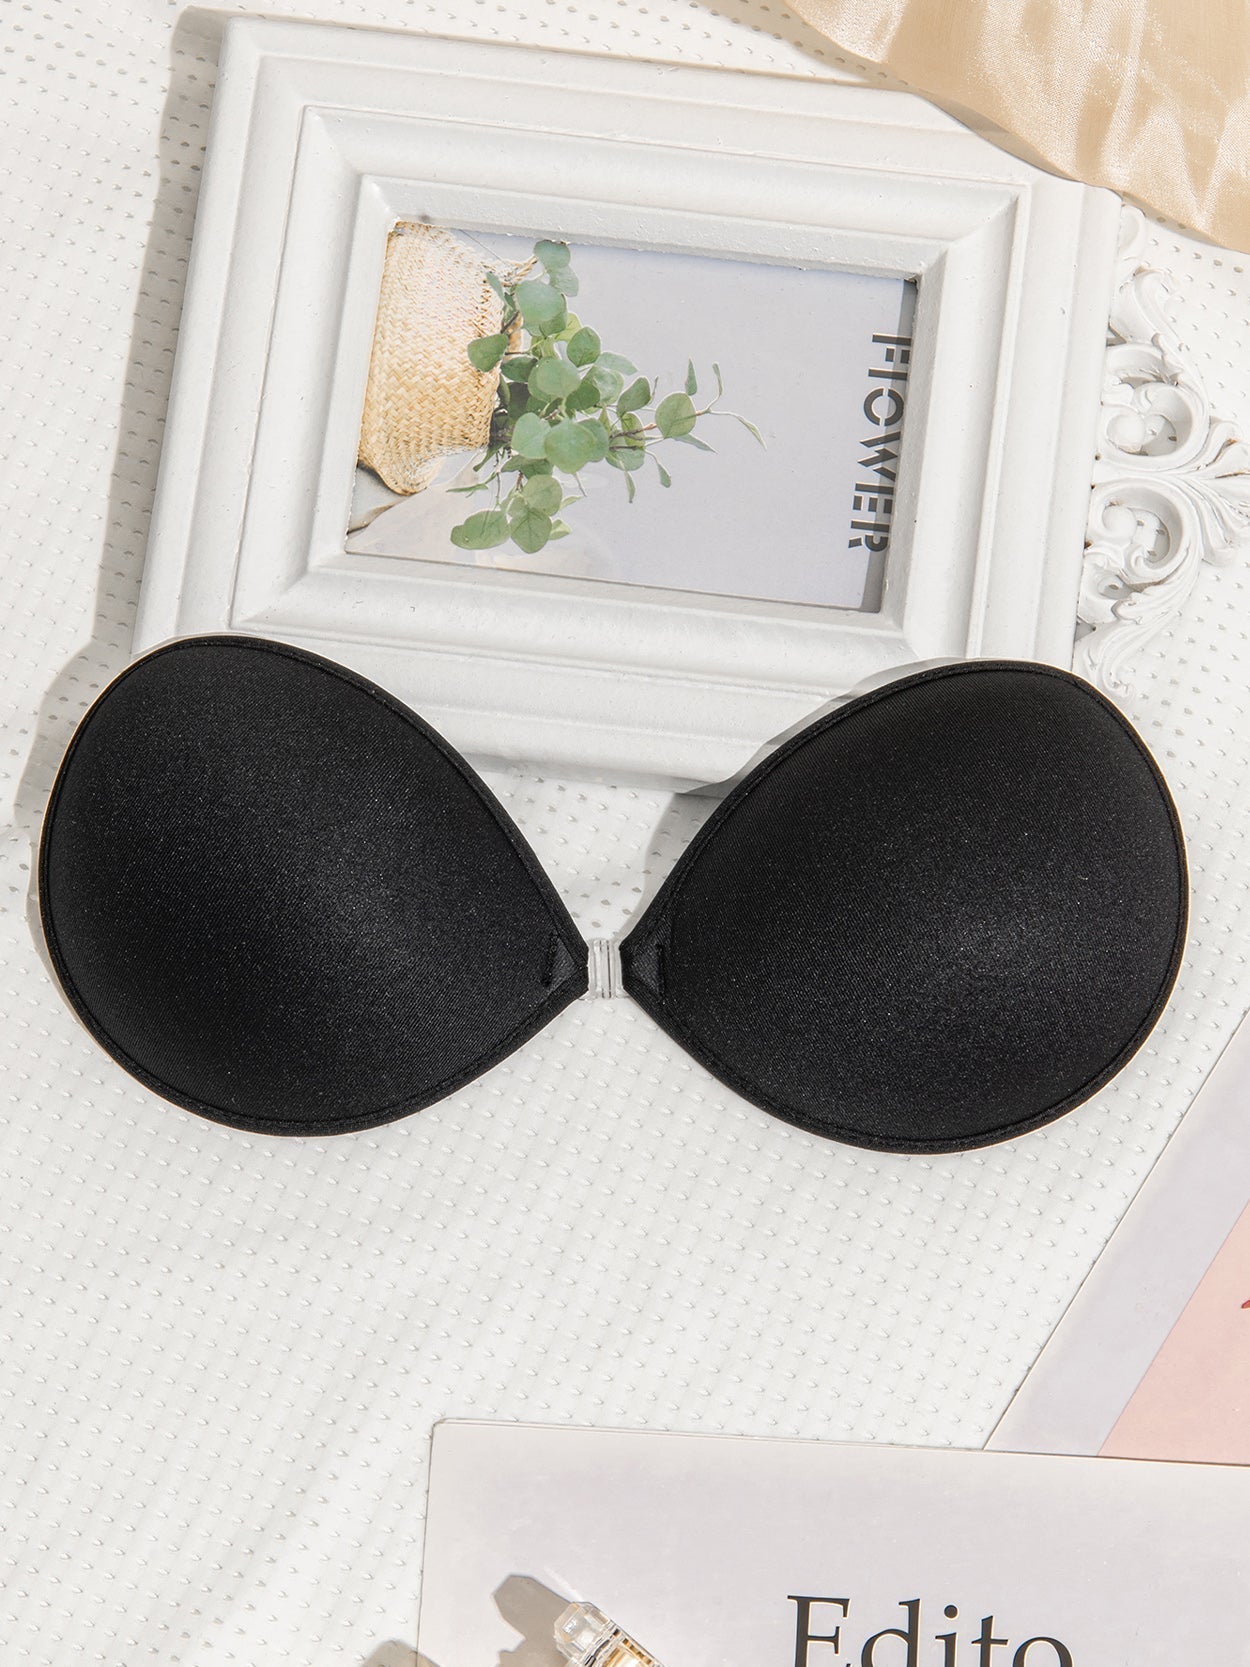 Wingslove Adhesive Bra Reusable Strapless Silicone Hugging